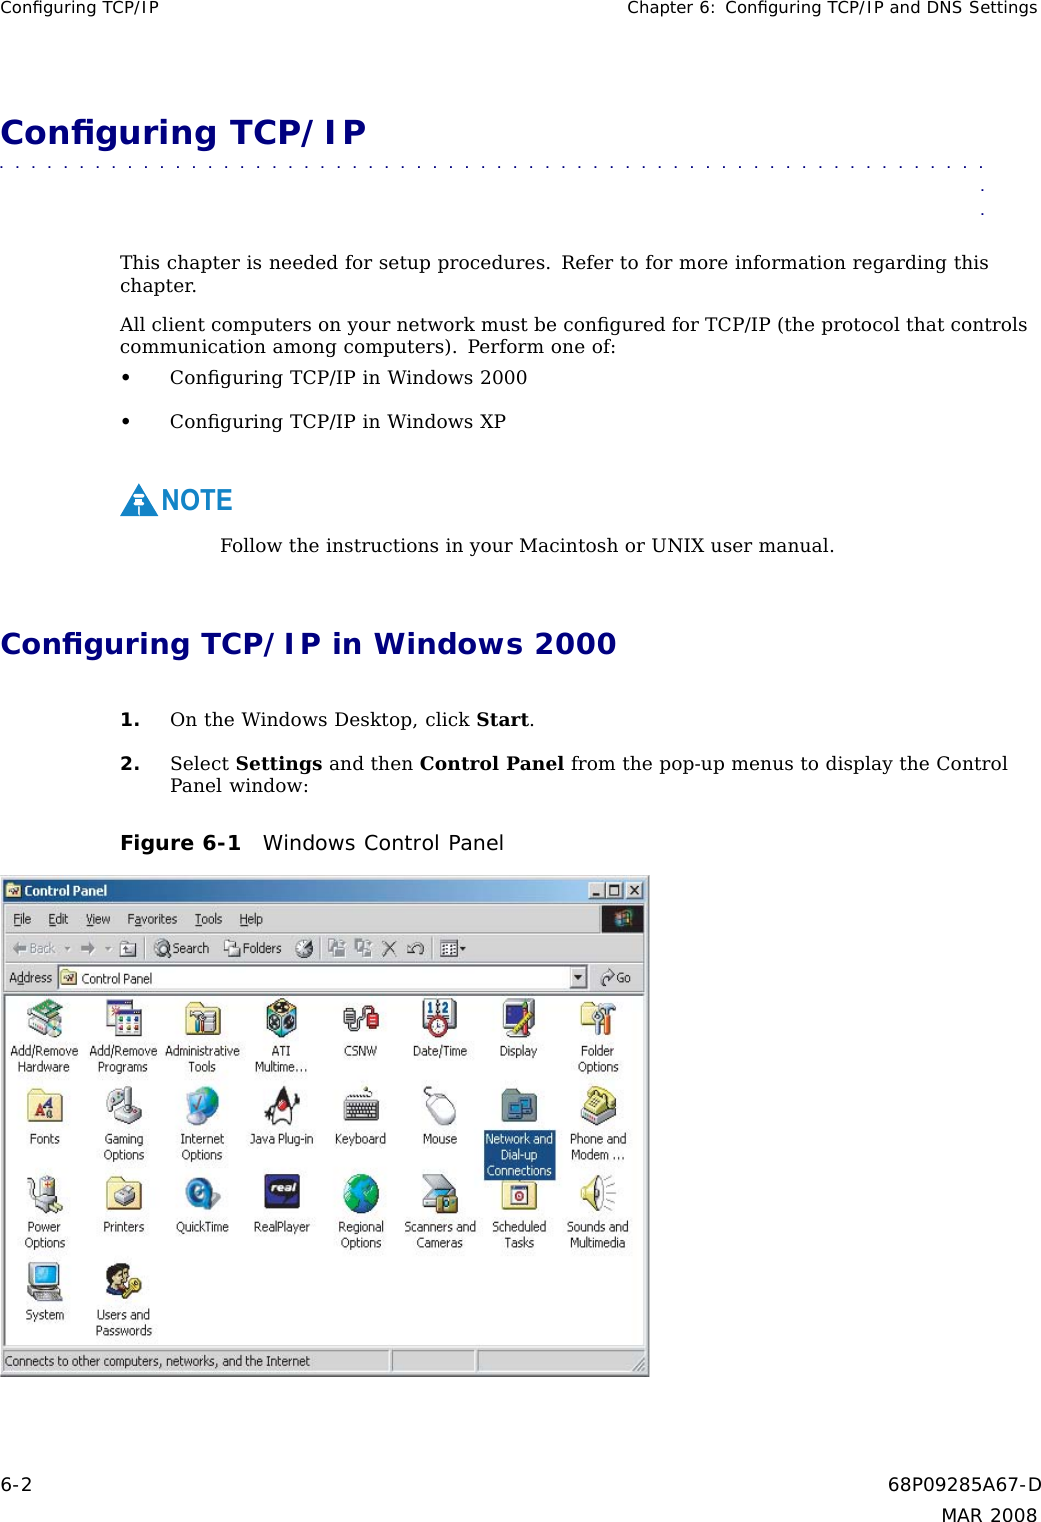 Conﬁguring TCP/IP Chapter 6: Conﬁguring TCP/IP and DNS SettingsConﬁguring TCP/IP■■■■■■■■■■■ ■■■■■■■■■■■■ ■■■■■■■■■■■■■ ■■■■■■■■■■■■■ ■■■■■■■■■■■■■■■Thischapterisneededforsetupprocedures. Refer to for more information regarding thischapter.All client computers on your network must be conﬁgured for TCP/IP (the protocol that controlscommunication among computers). Perform one of:•Conﬁguring TCP/IP in Windows 2000•Conﬁguring TCP/IP in Windows XPNOTEFollow the instructions in your Macintosh or UNIX user manual.Conﬁguring TCP/IP in Windows 20001. On the Windows Desktop, click Start.2. Select Settings and then Control Panel from the pop-up menus to display the ControlPanel window:Figure 6-1 Windows Control Panel6-2 68P09285A67-DMAR 2008